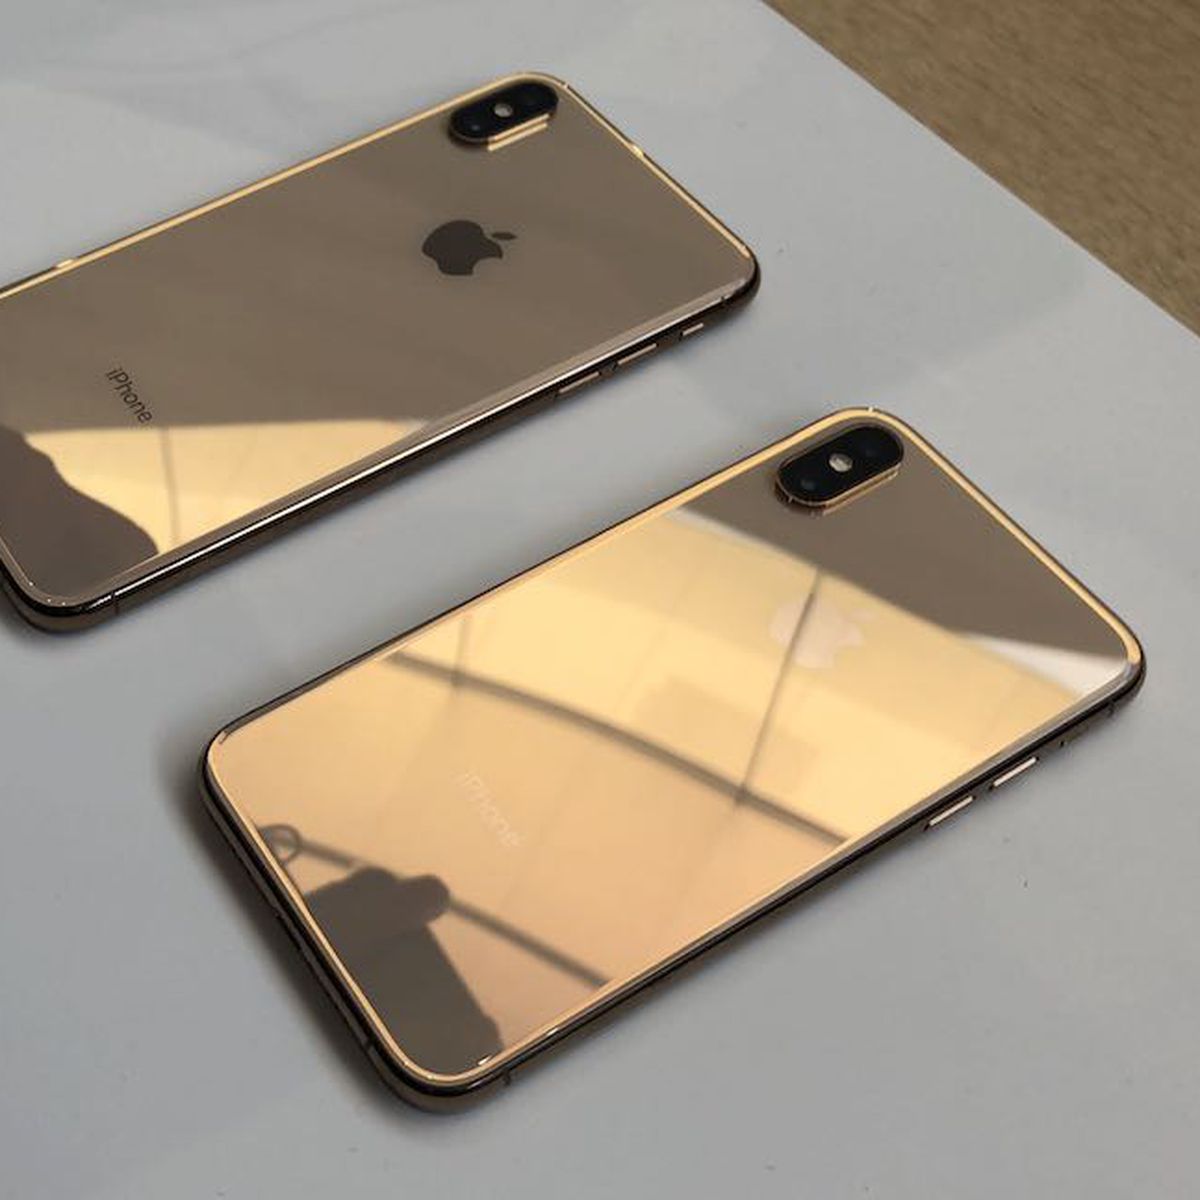 Iphone Xs And Xs Max Reviews Not Dramatically Better Than Iphone X Consider Waiting For Iphone Xr Macrumors